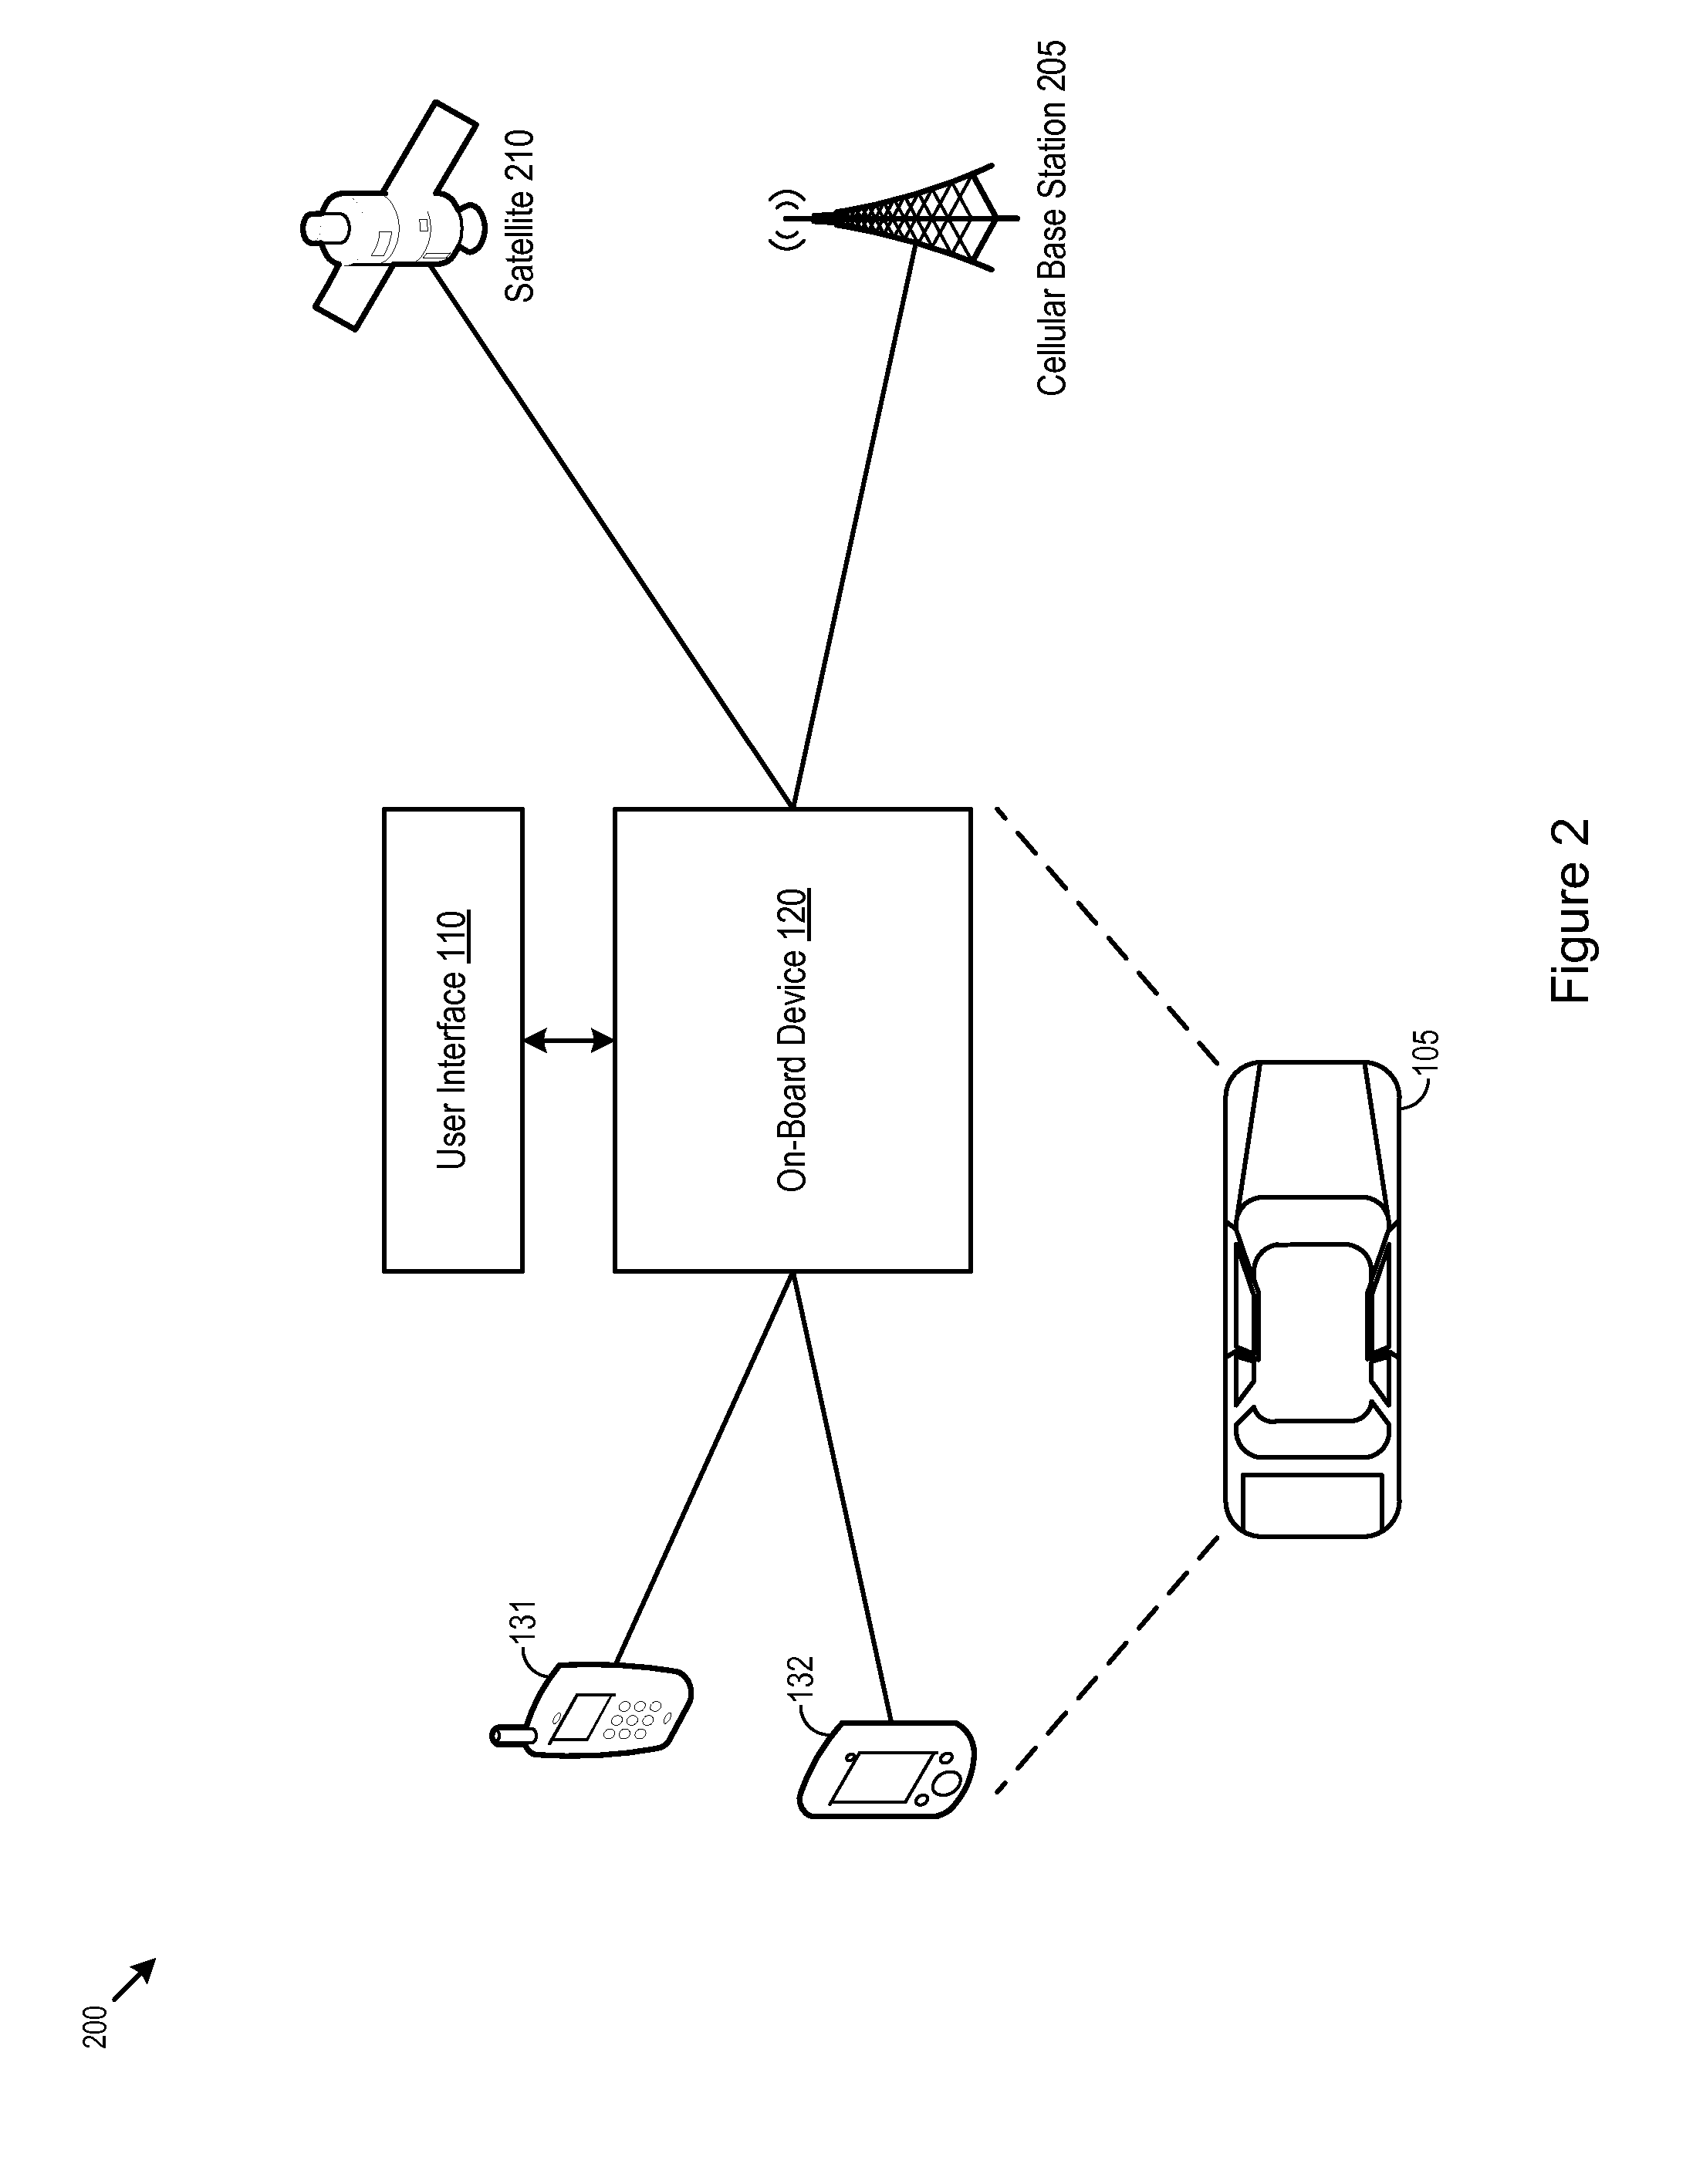 Vehicle broadcasting system